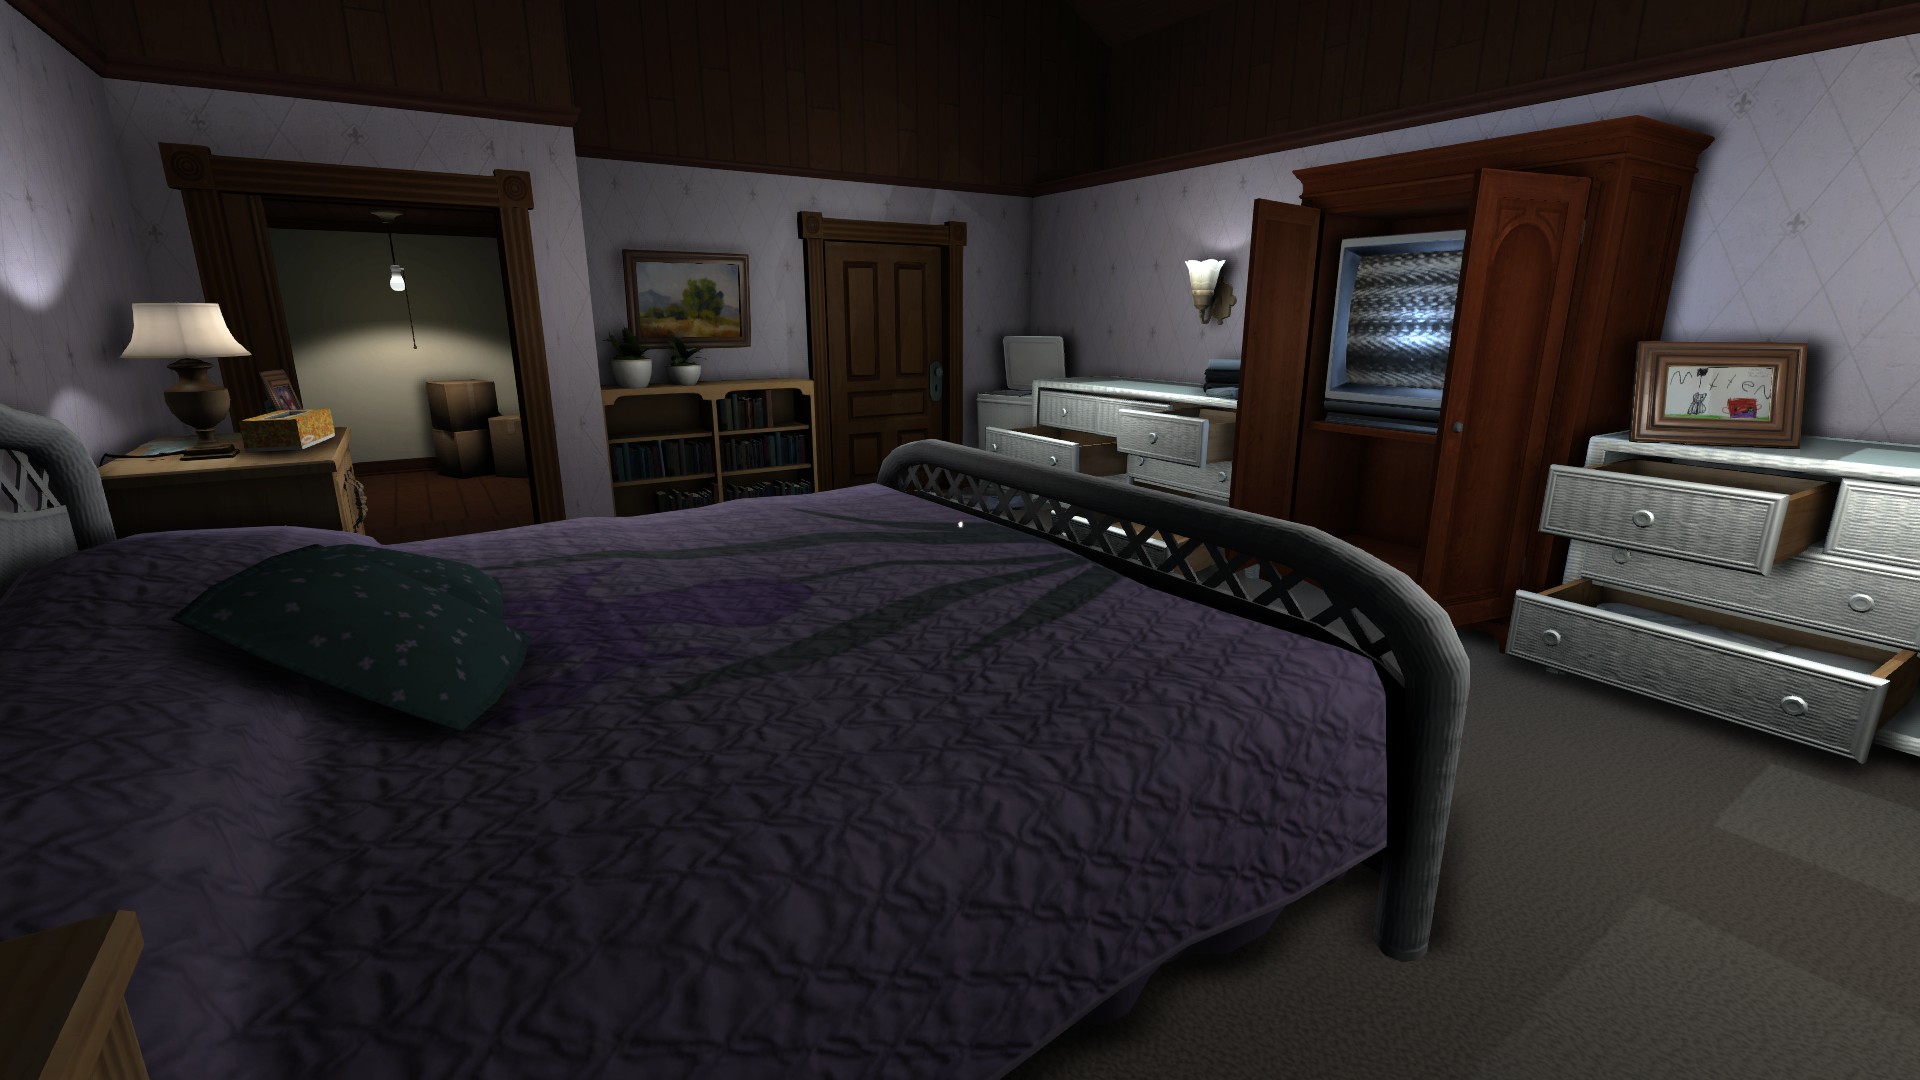 Gone Home #14